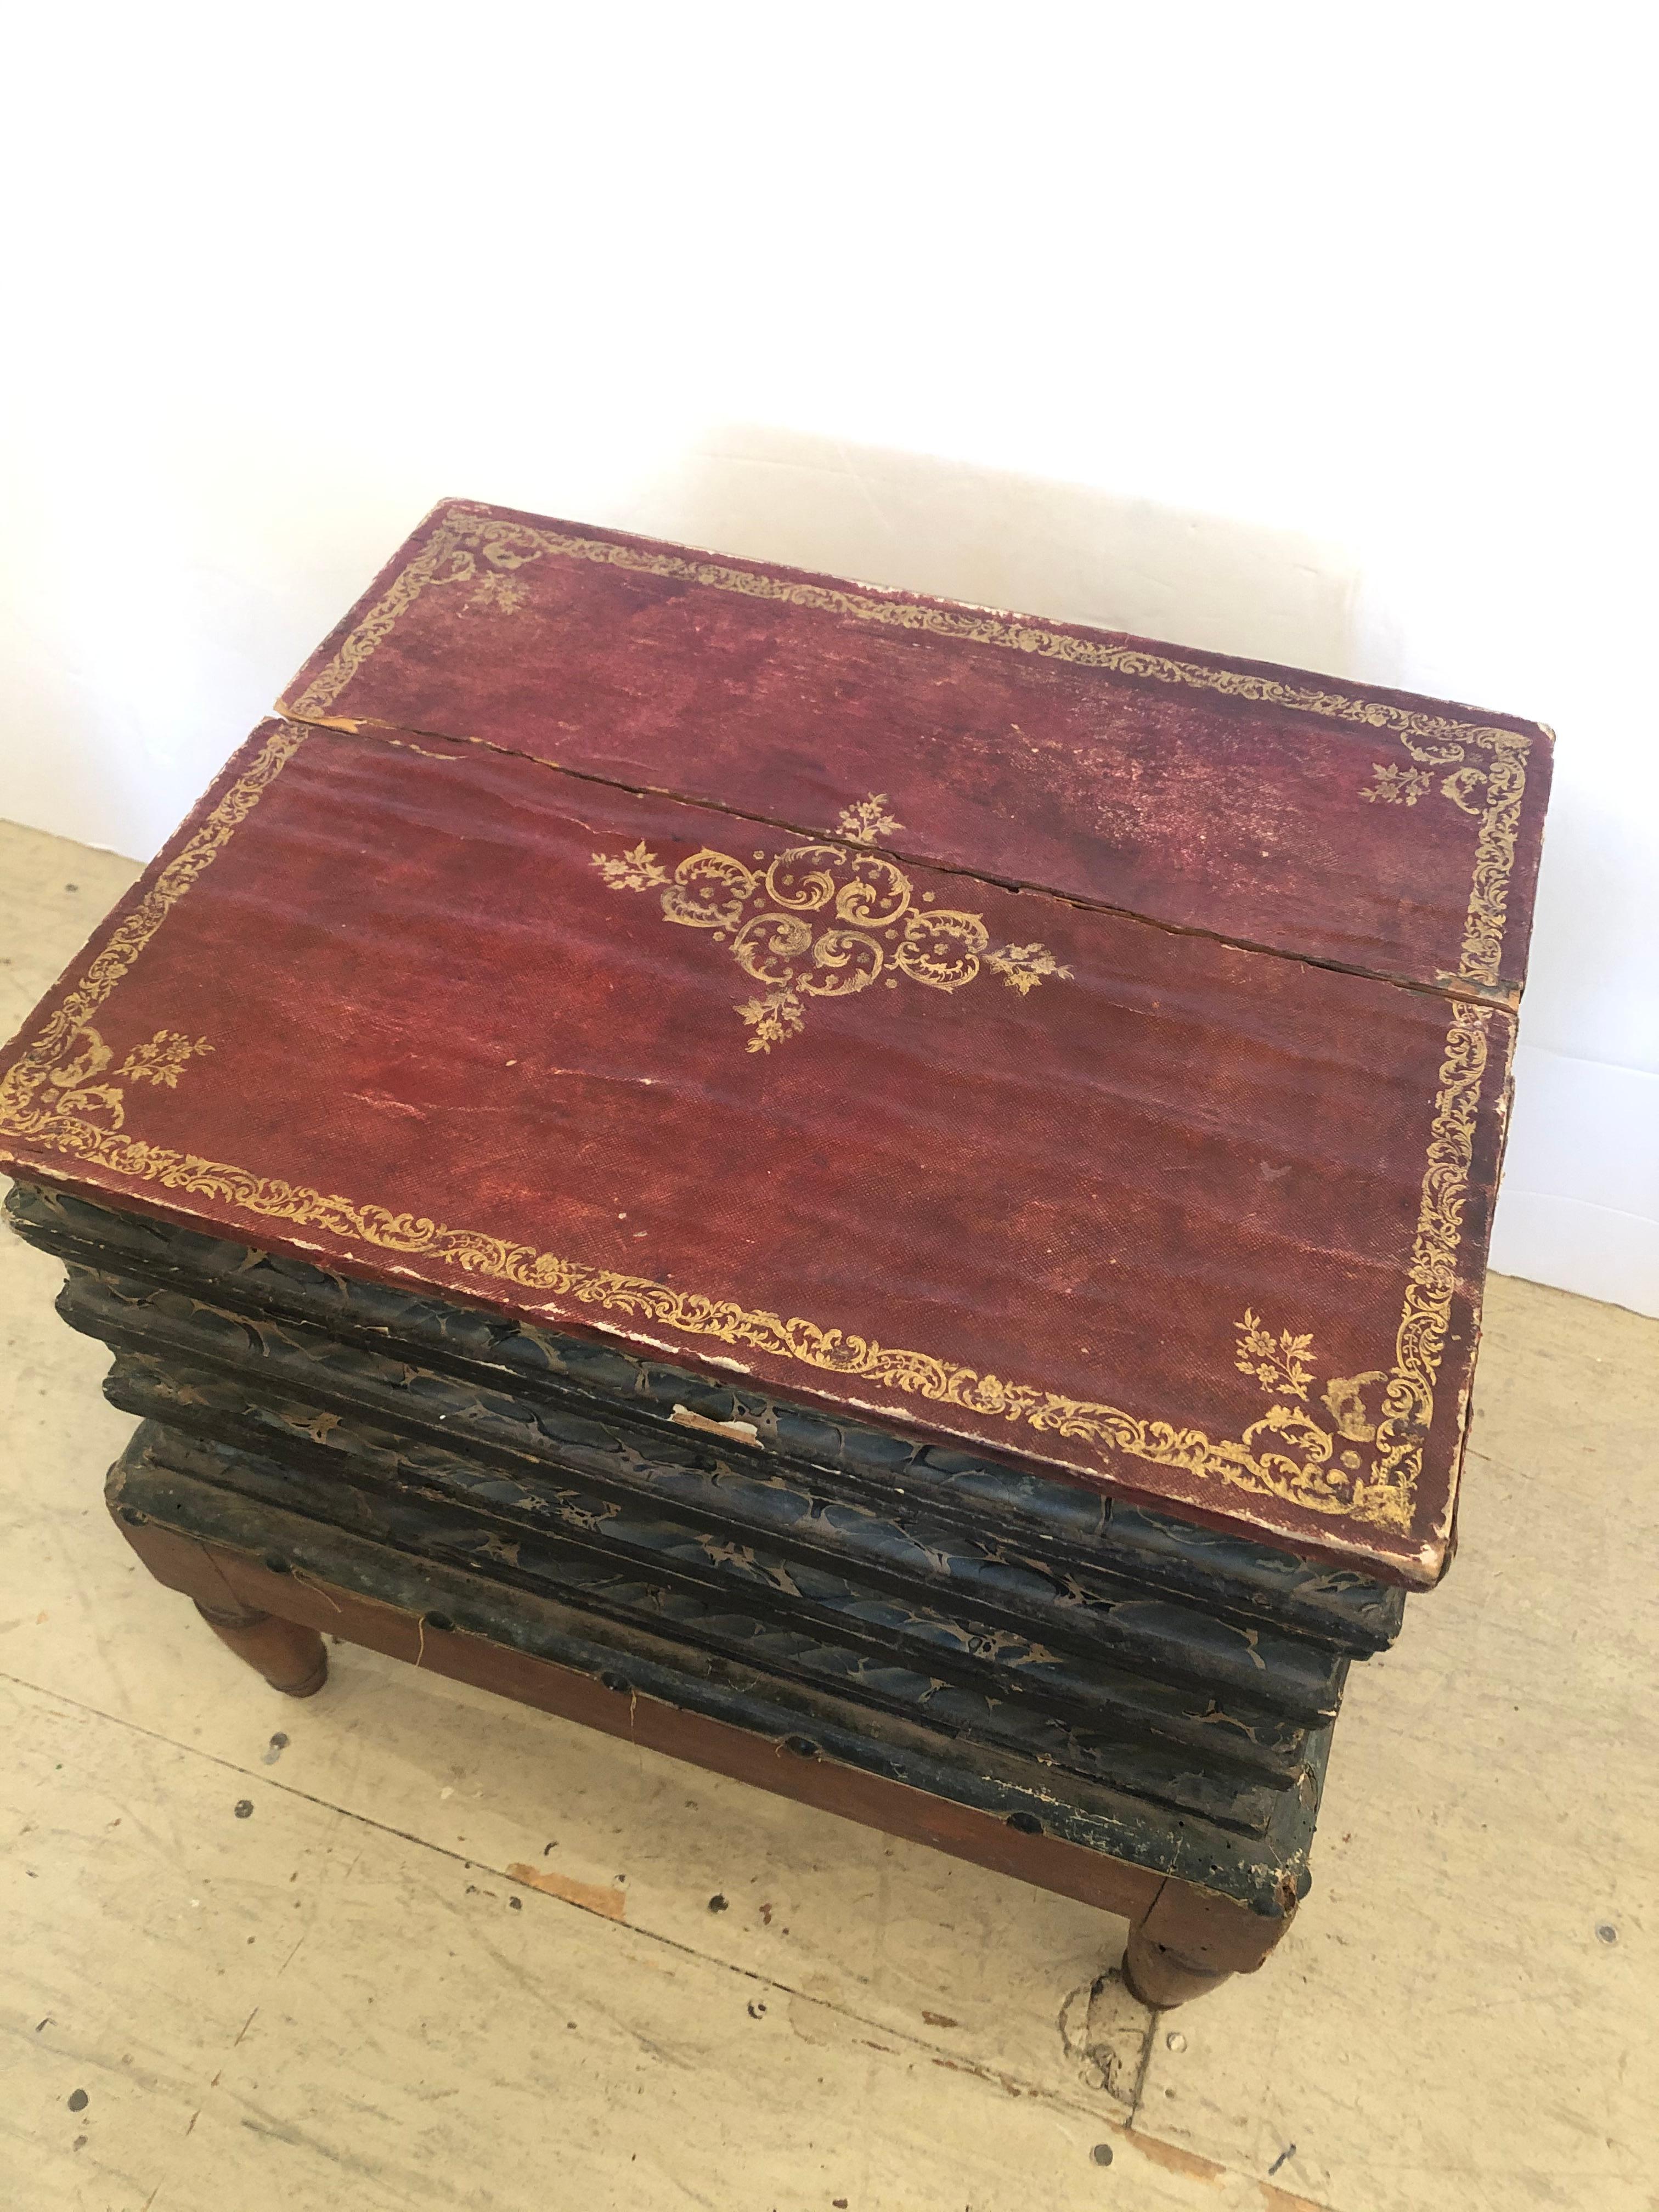 Superb Aged 19th Century Italian Paper Wrapped Trompe l'oeil Book Side Table Box 2